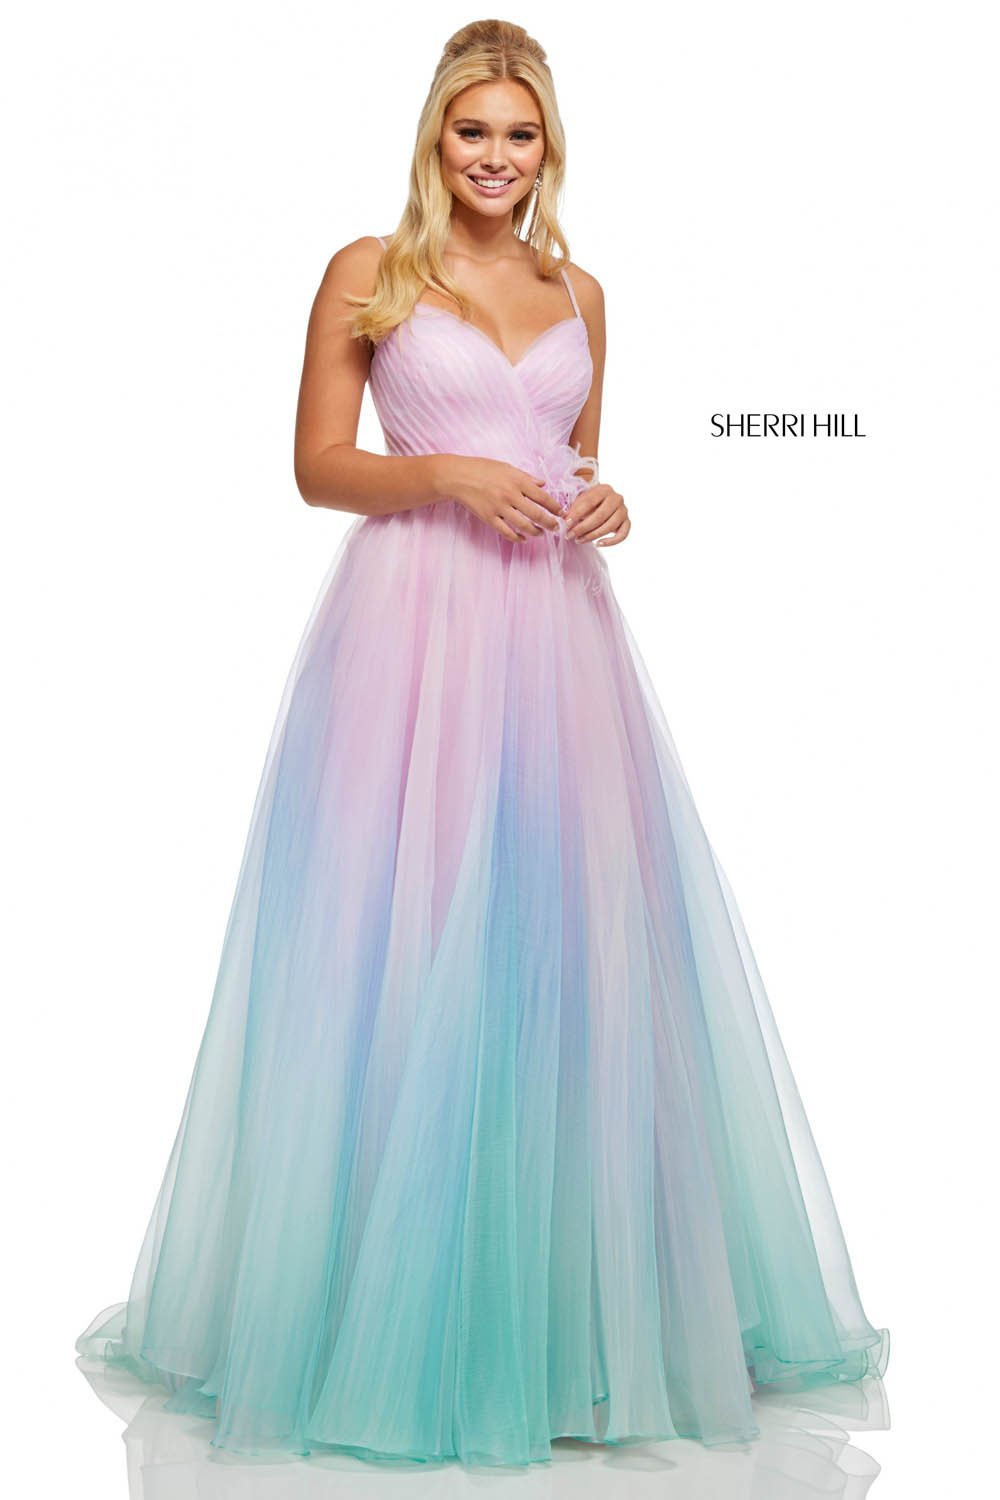 Sherri Hill 52703 dress images in these colors: Pink Green, Lilac, Light Blue.